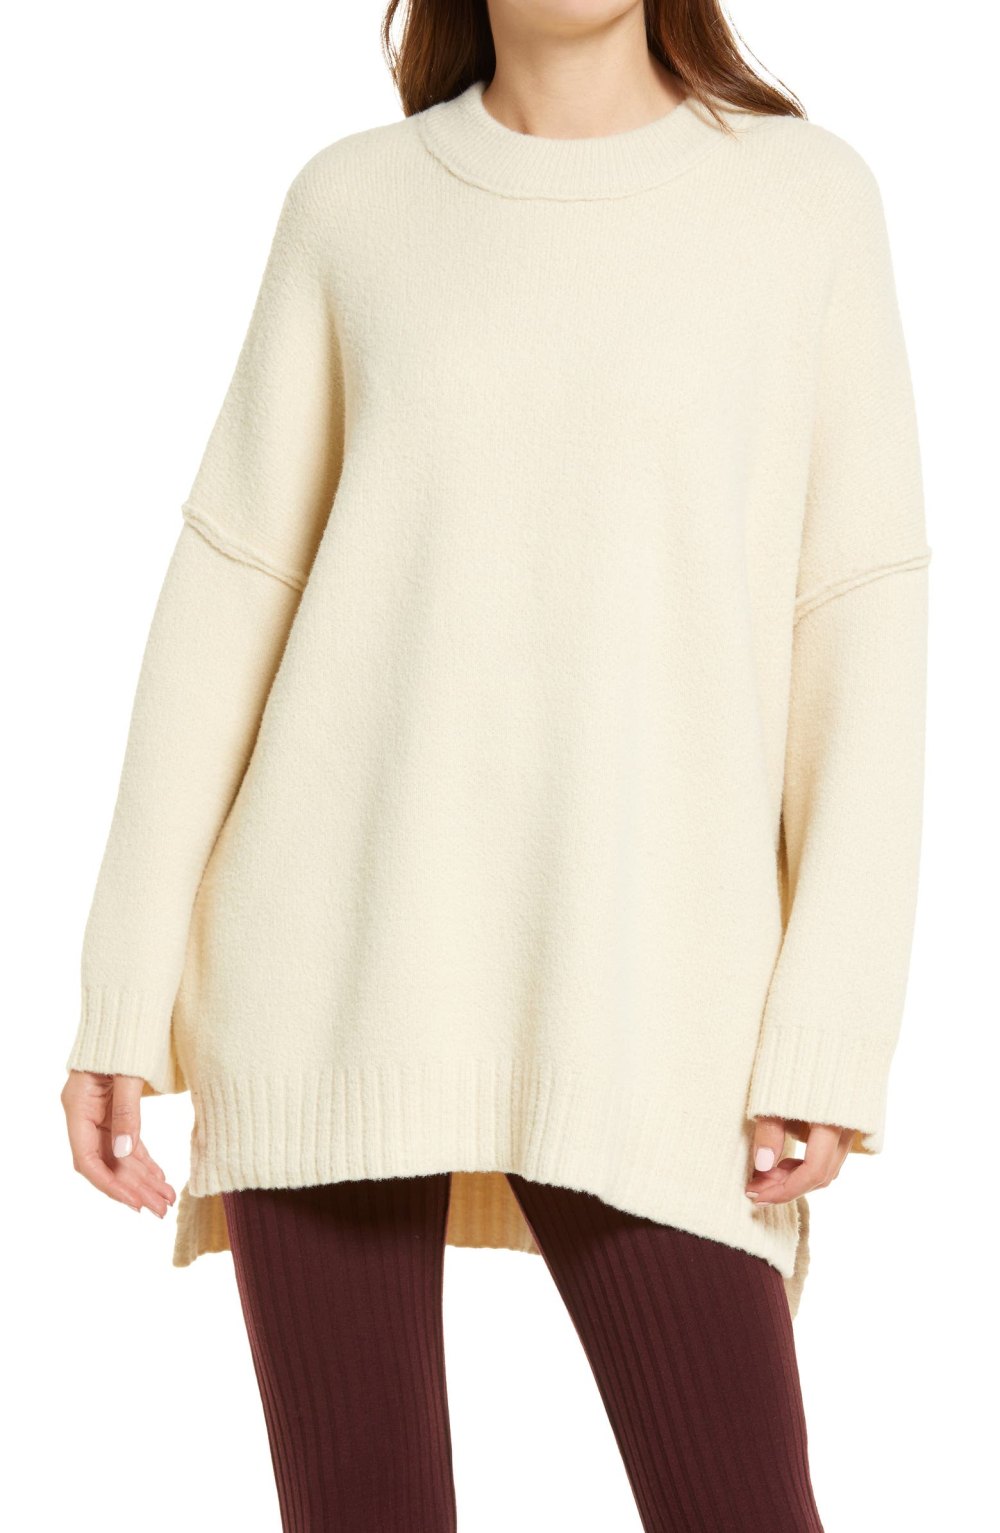 This Free People Sweater Is a Comfy Closet Staple — On Sale for 40% Off ...